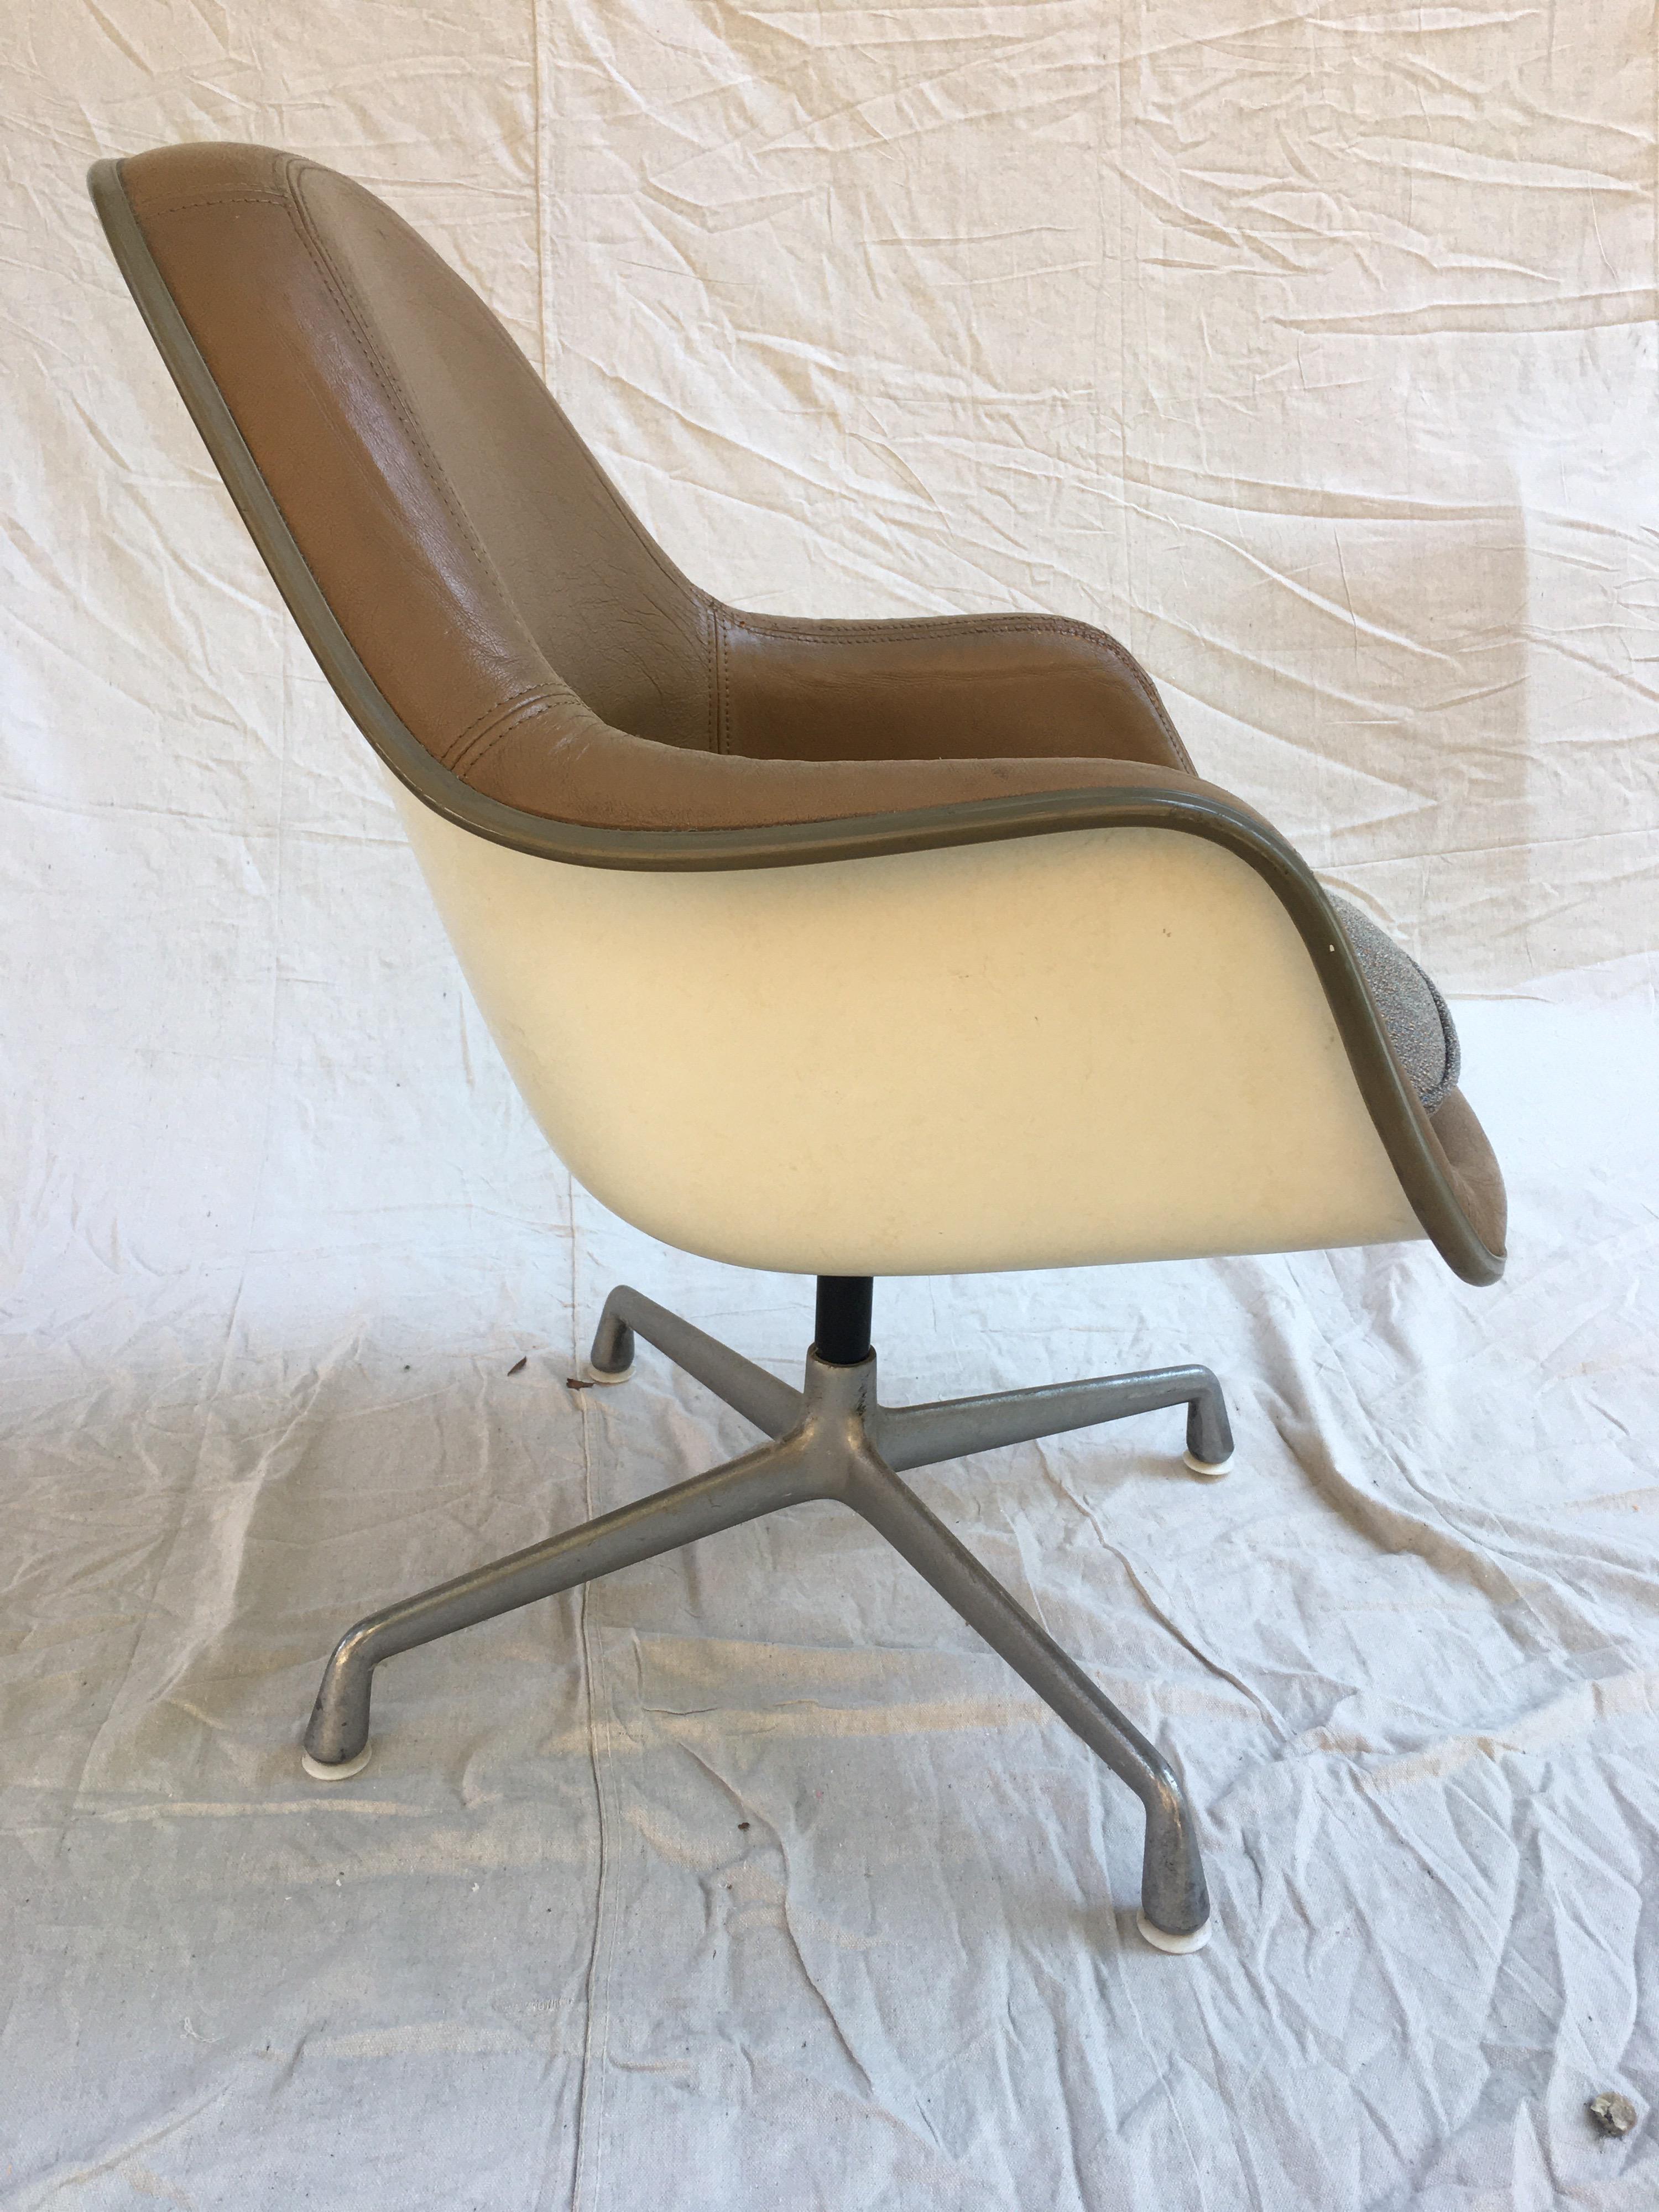 Late 20th Century Eames Leather High Back Chairs